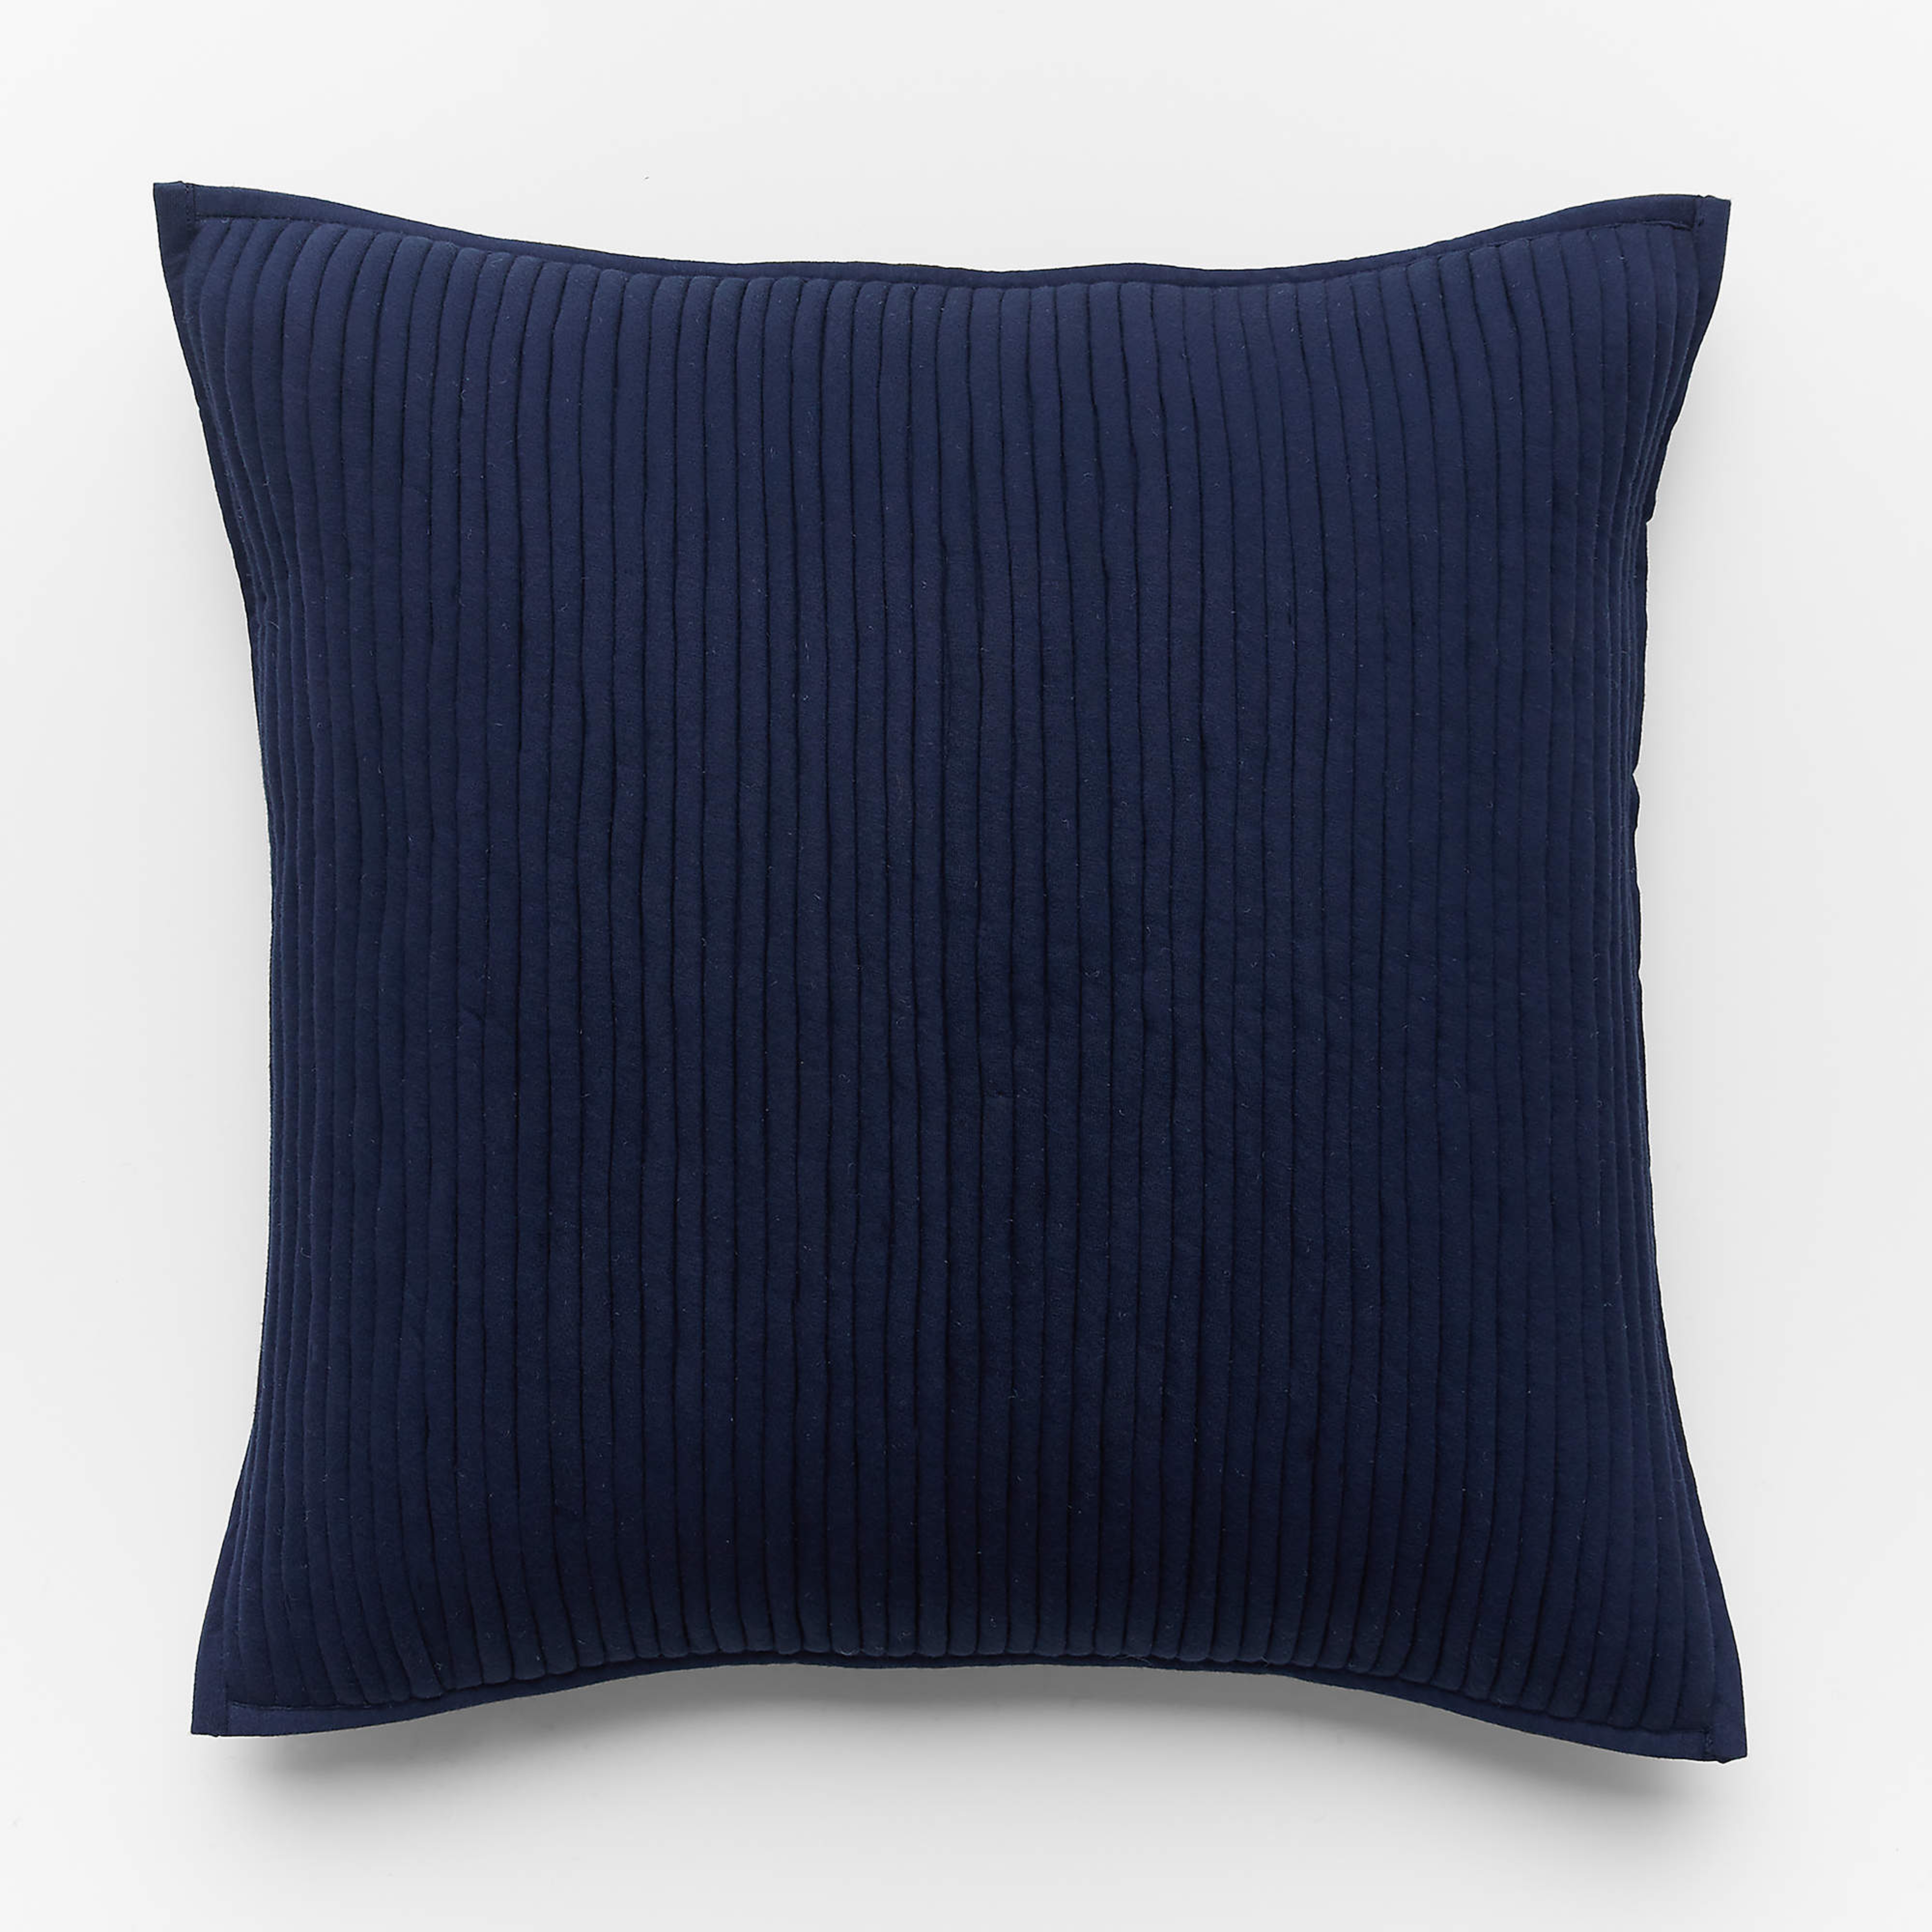 Sequence Navy Throw Pillow with Feather-Down Insert 20" - CB2